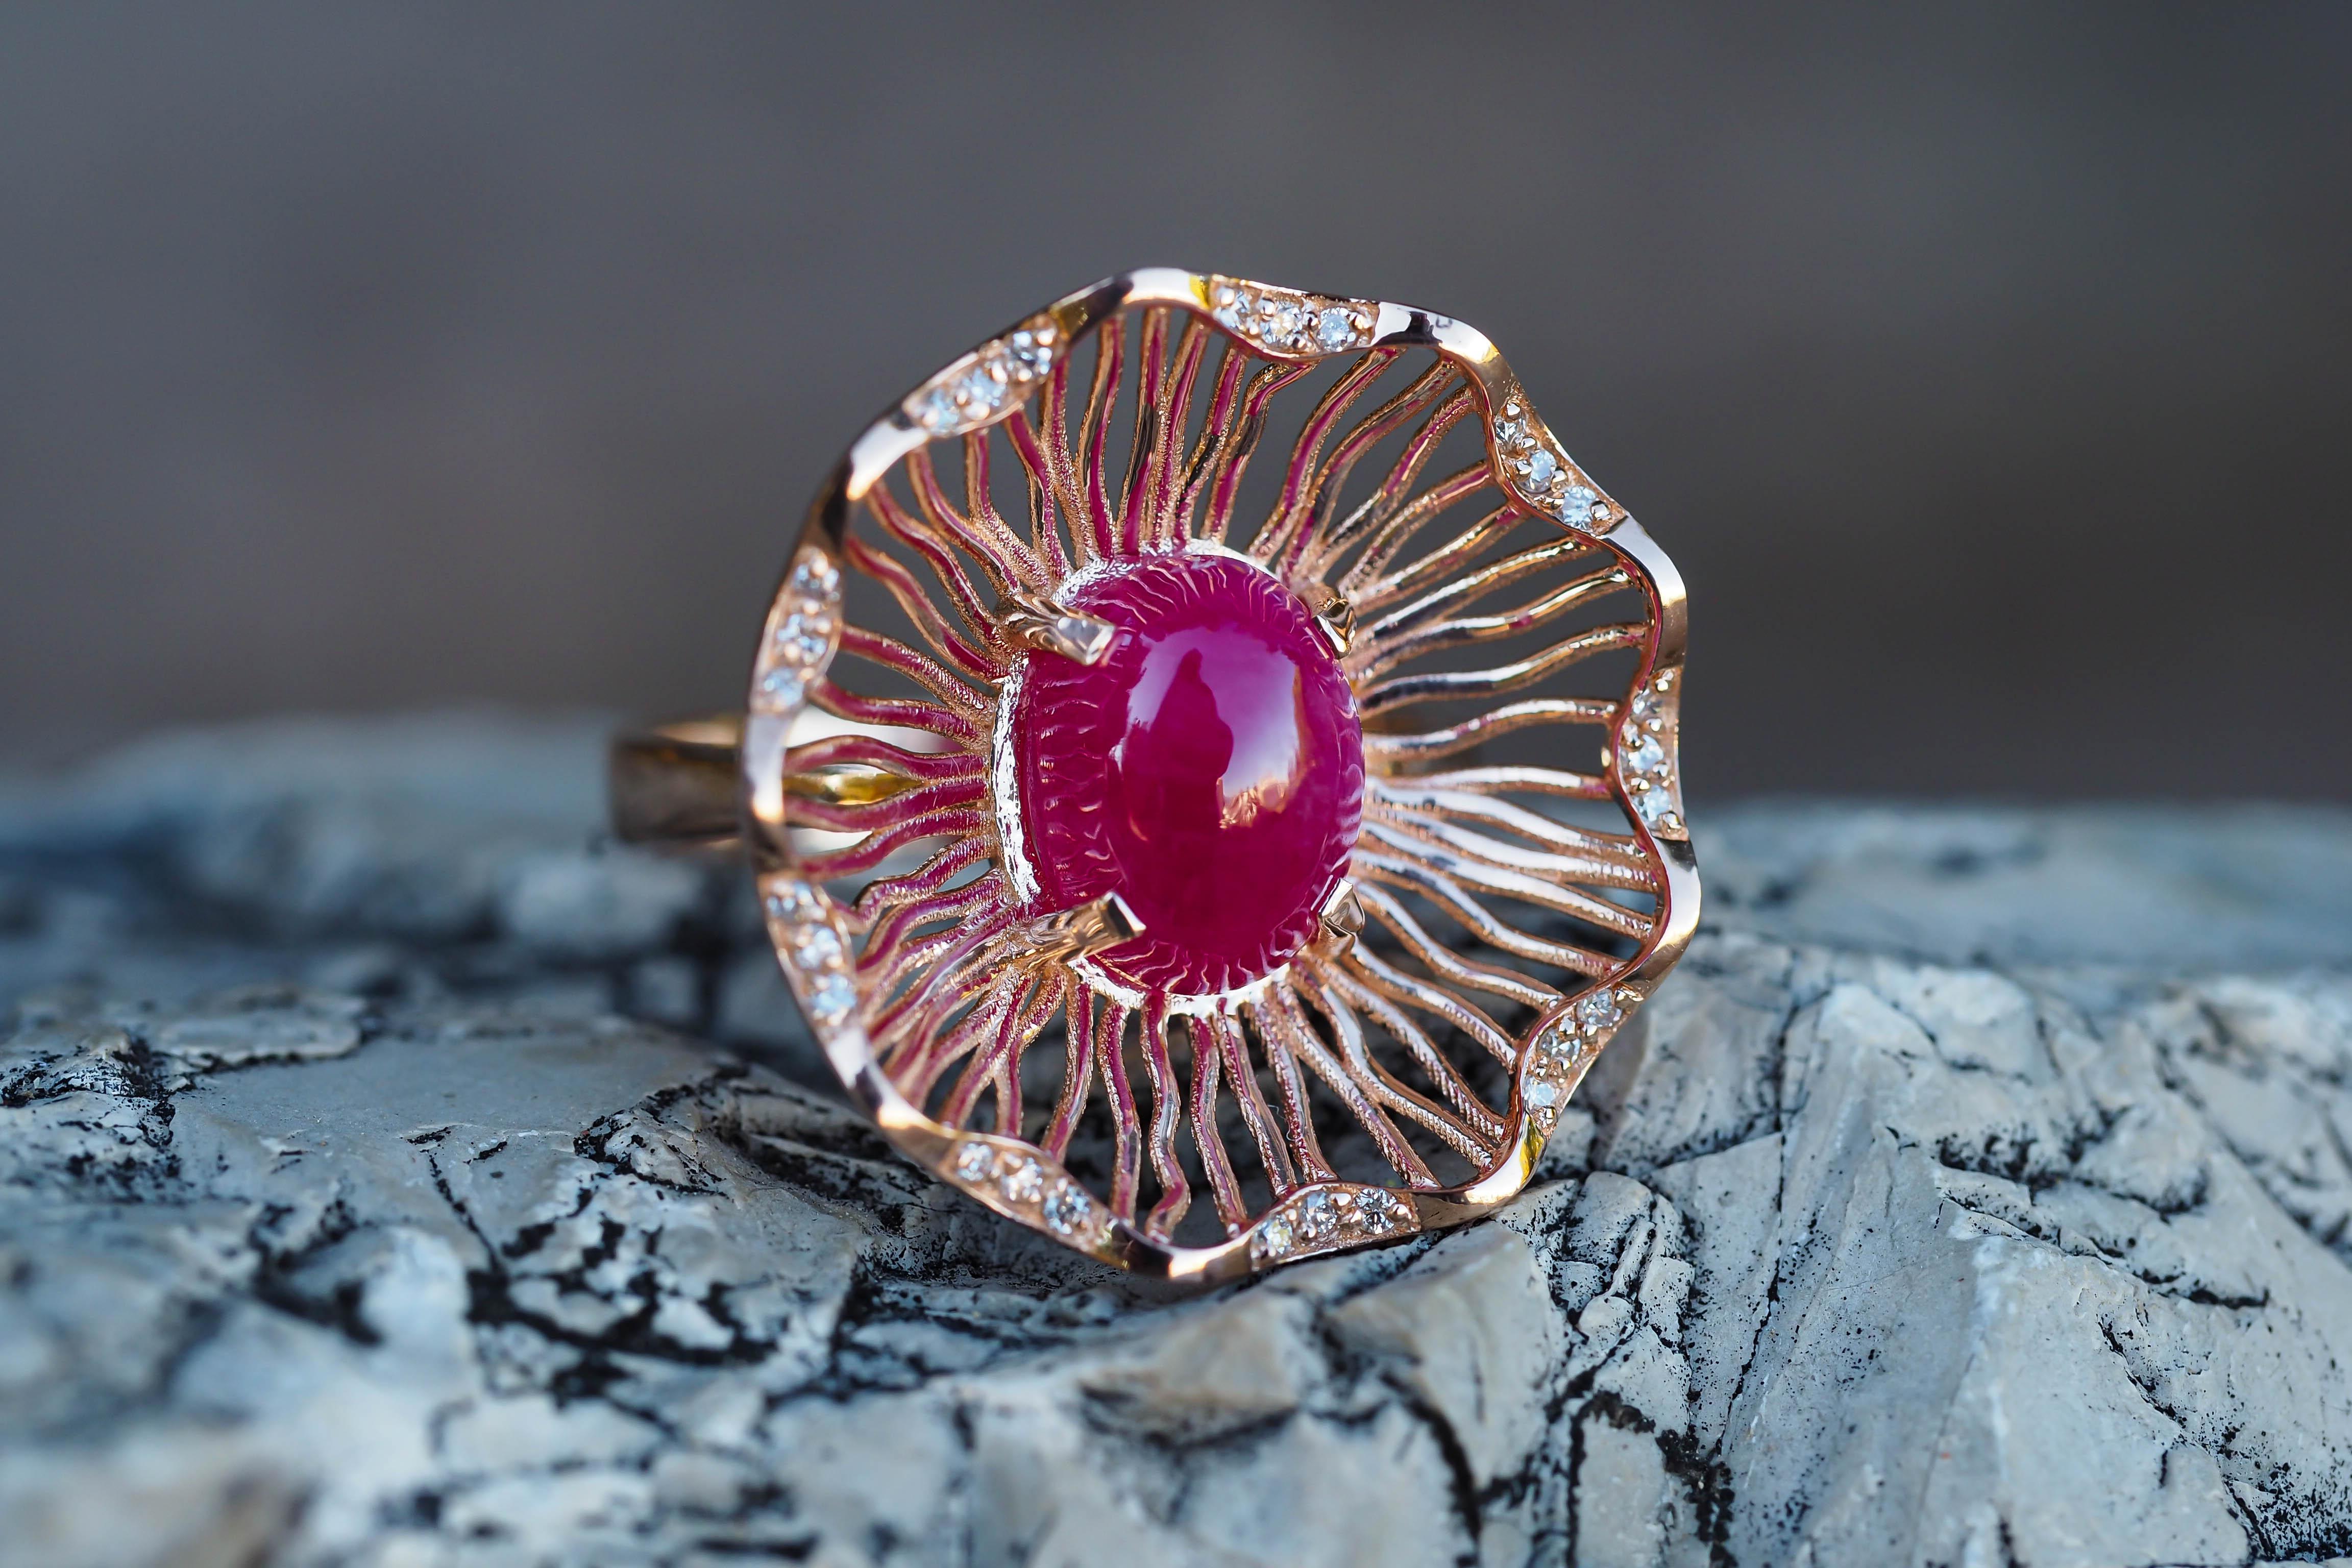 For Sale:  14k Gold Ring with Ruby and Diamonds, Vintage Inspired Ring with Ruby 8